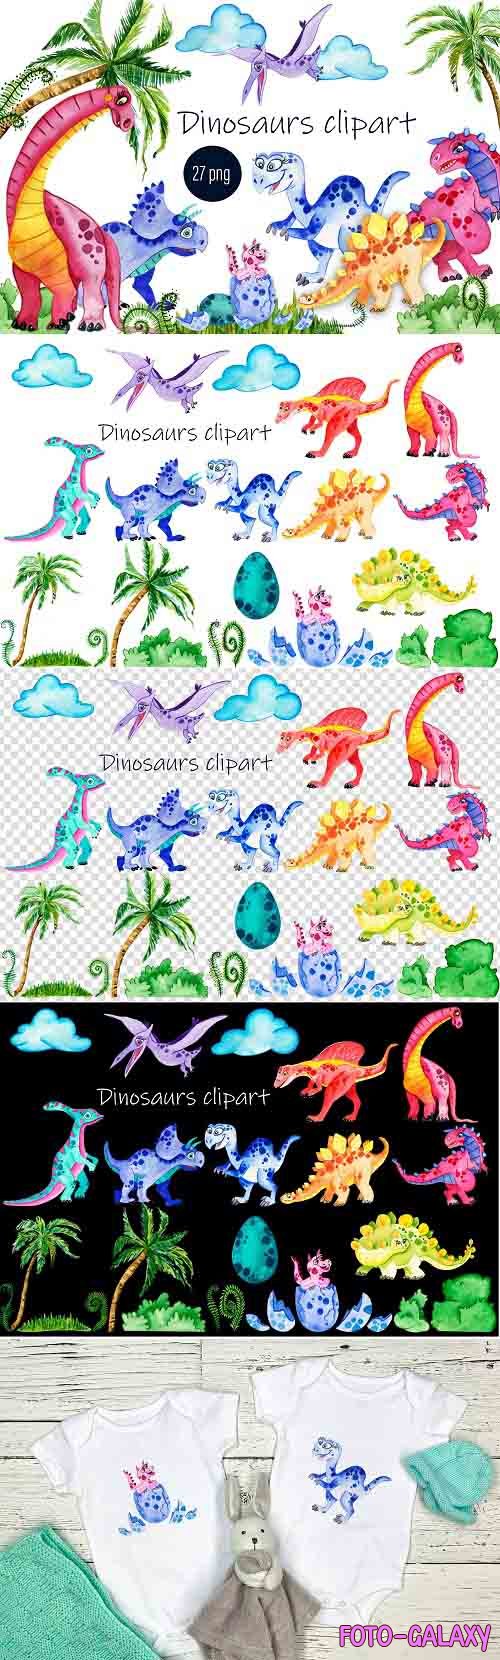 Baby Cute Dinosaurs Watercolor Clipart - 1374750